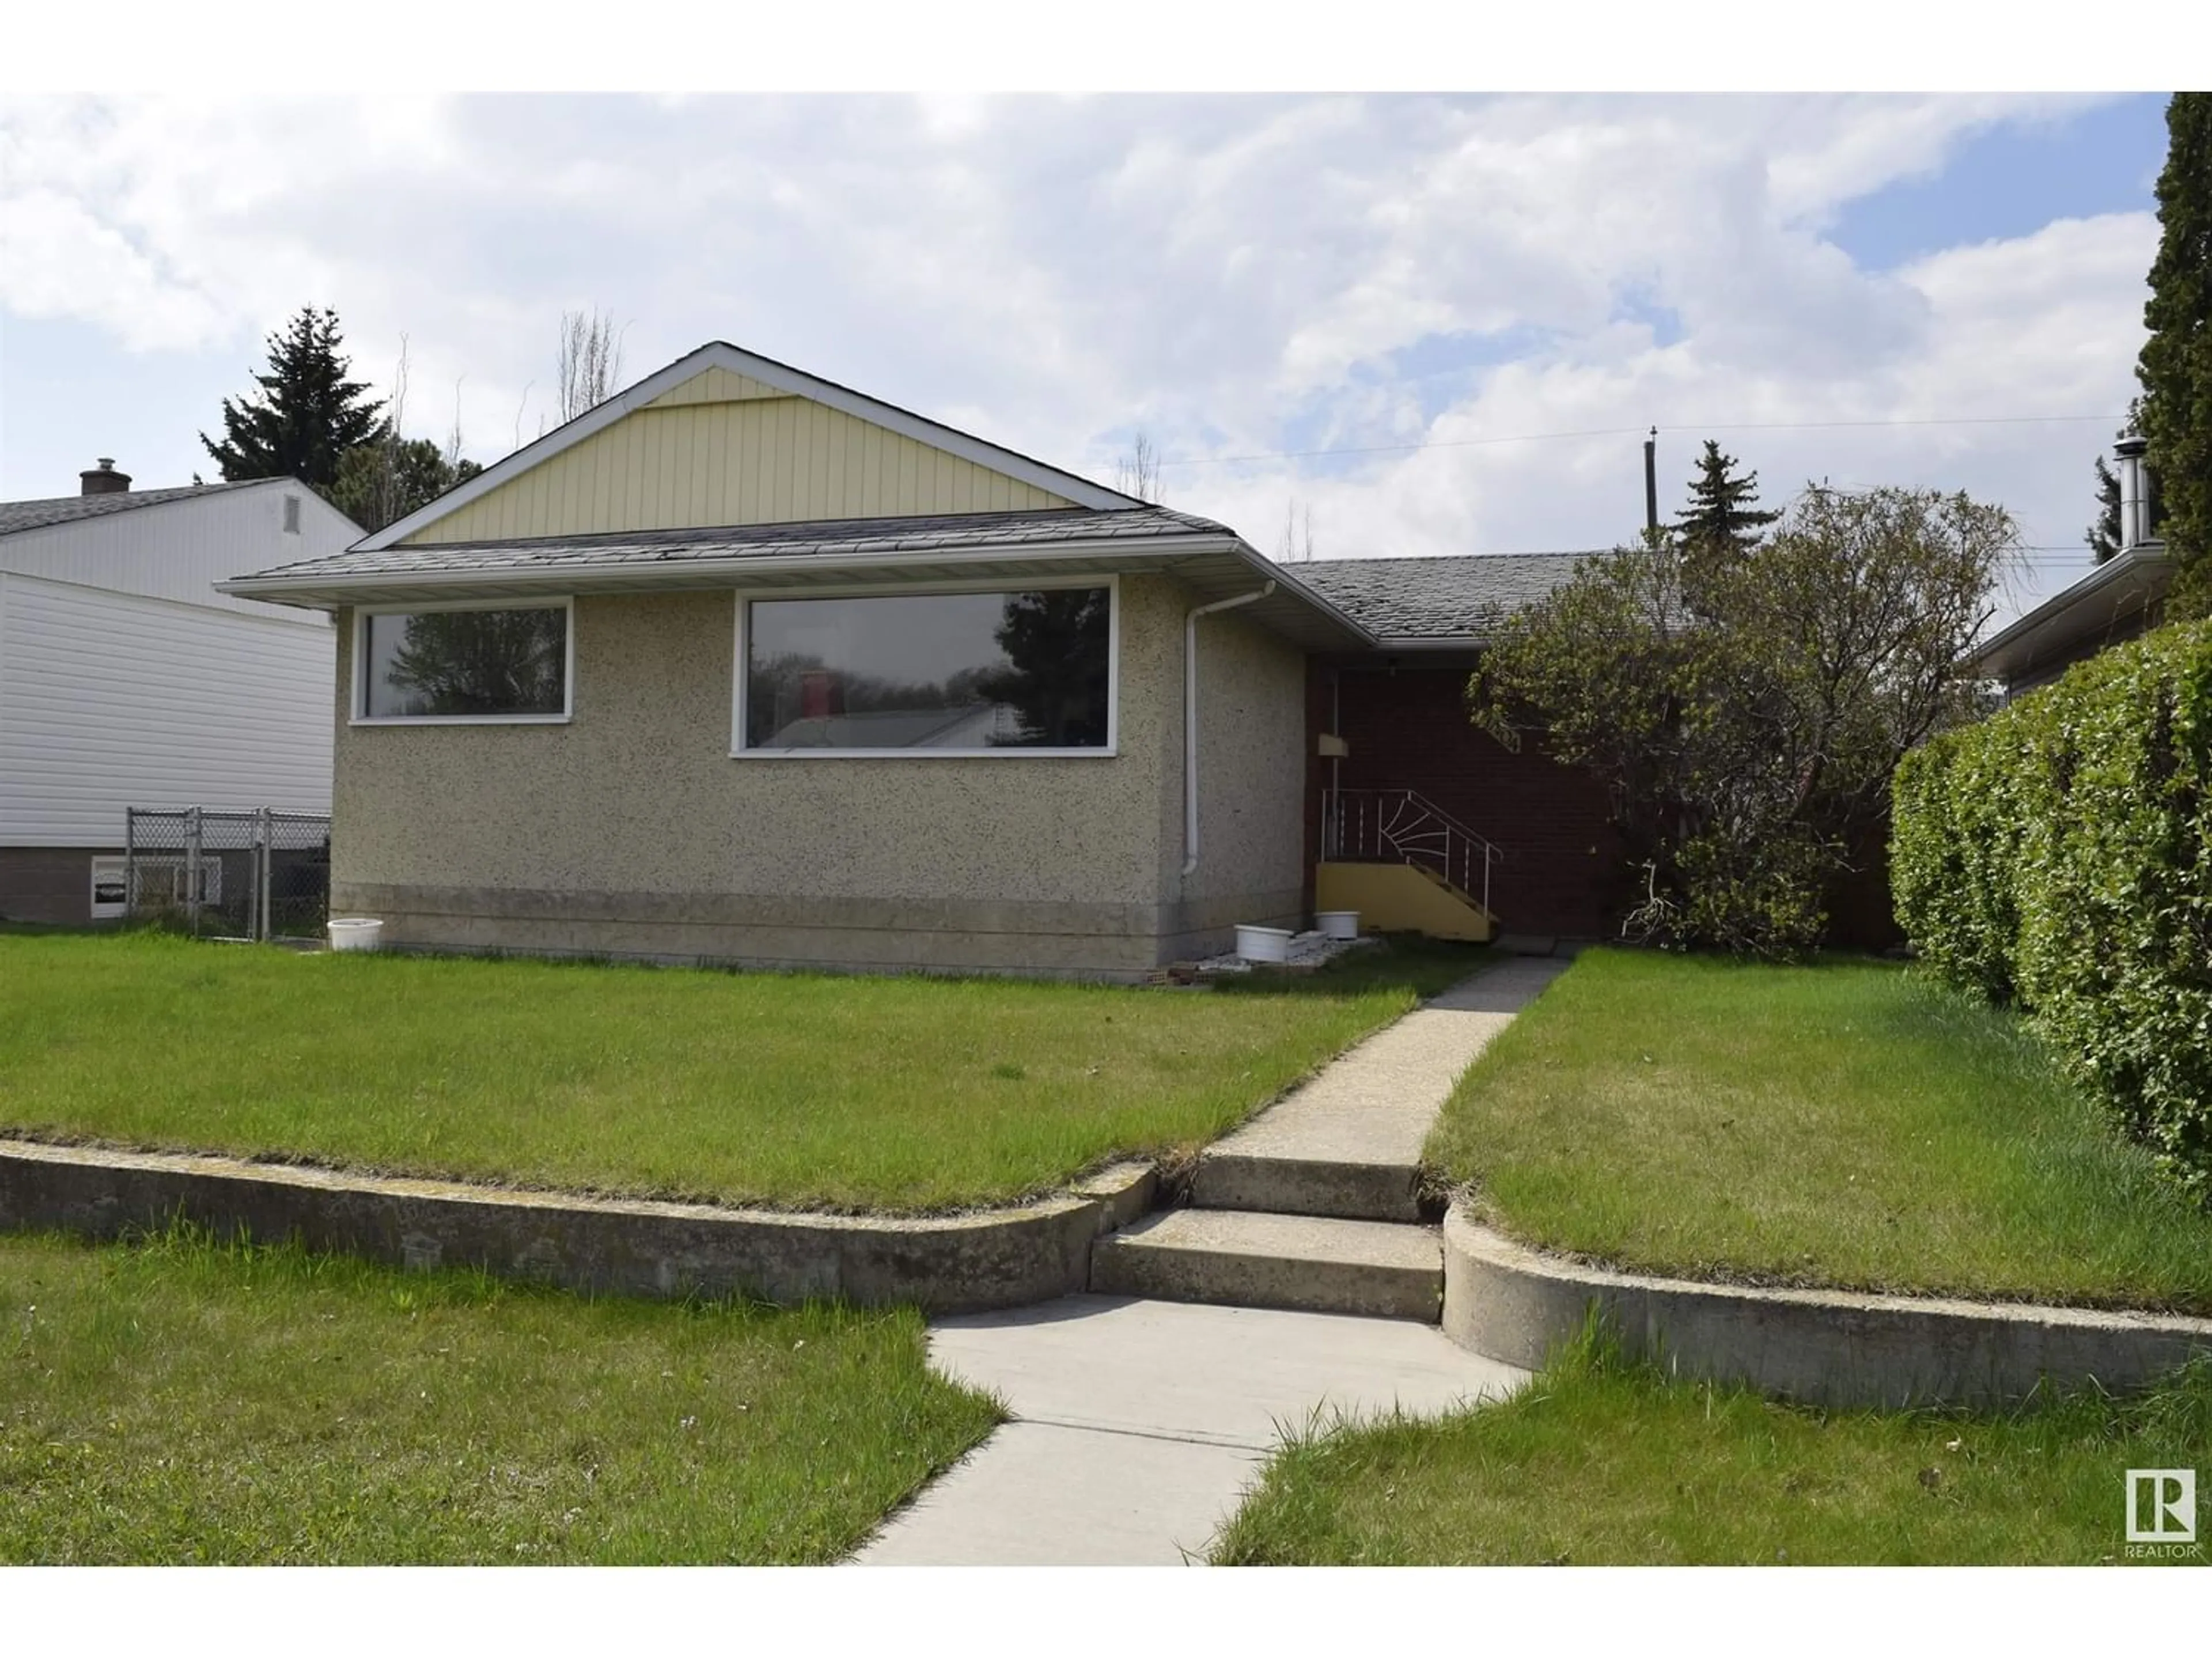 Frontside or backside of a home for 7404 82 ST NW, Edmonton Alberta T6C2X1